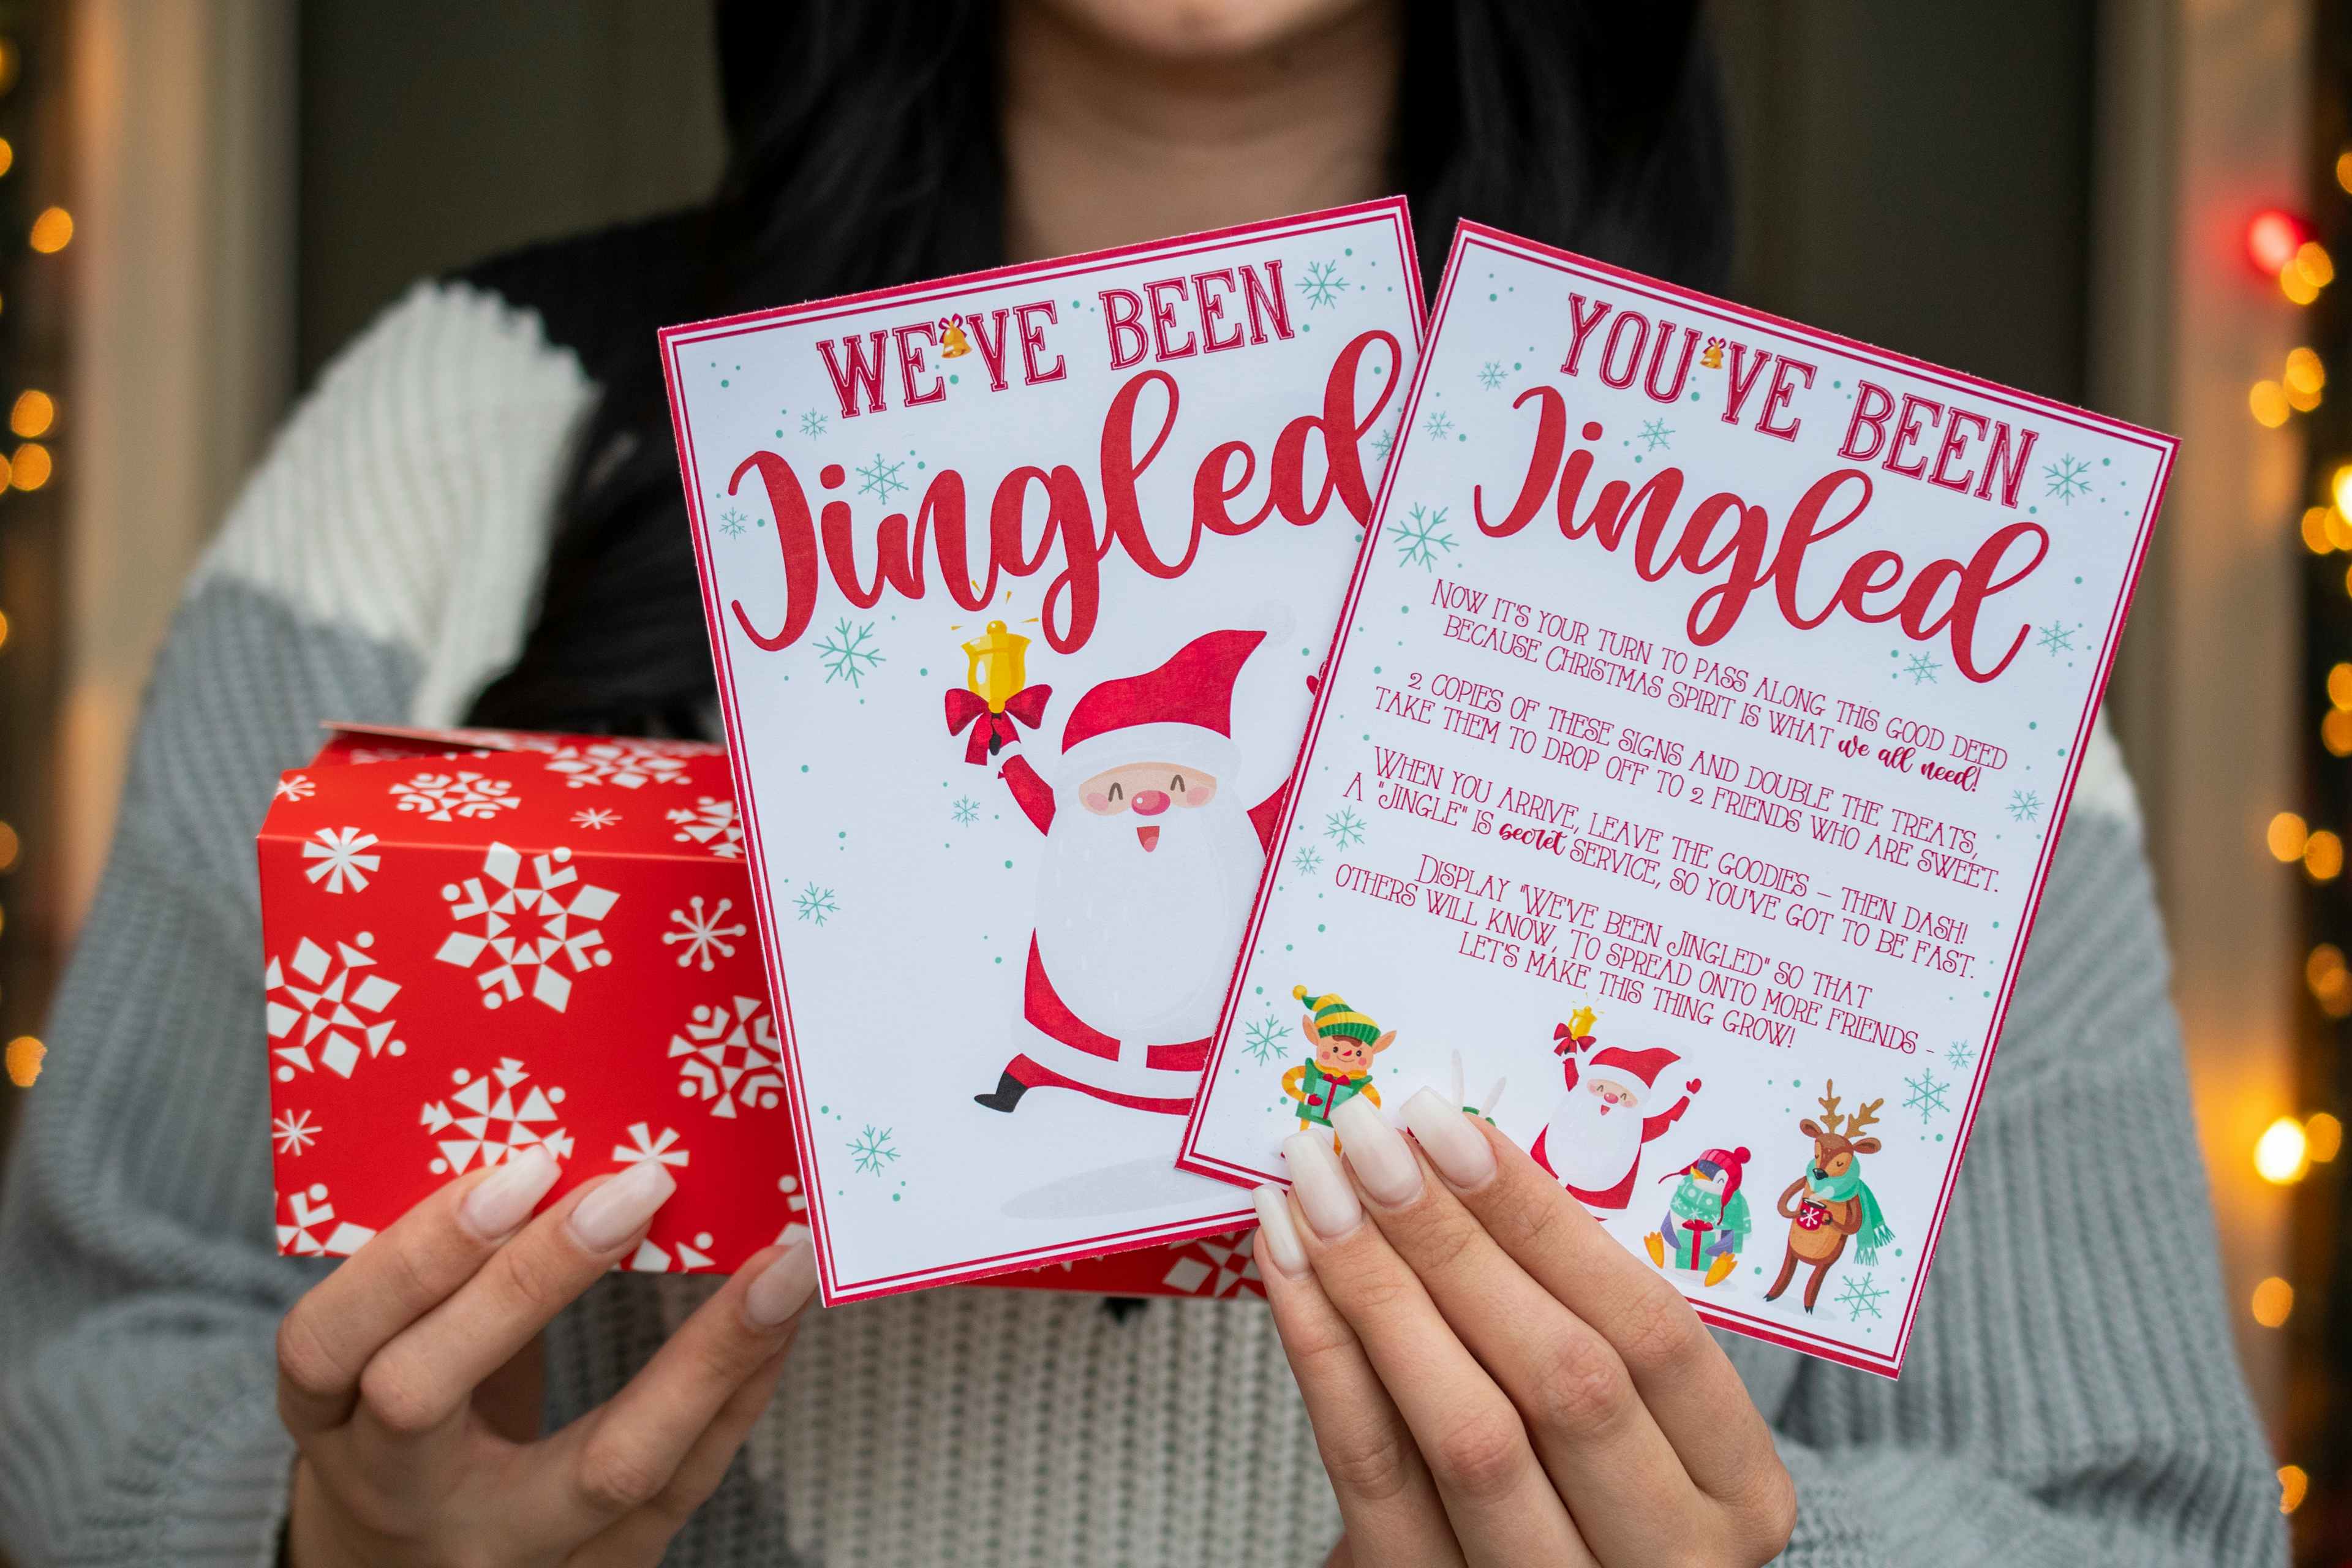 Someone holding a wrapped present and two cards, one saying "we've been jingled" and the other saying, "you've been jingled" with an expl...